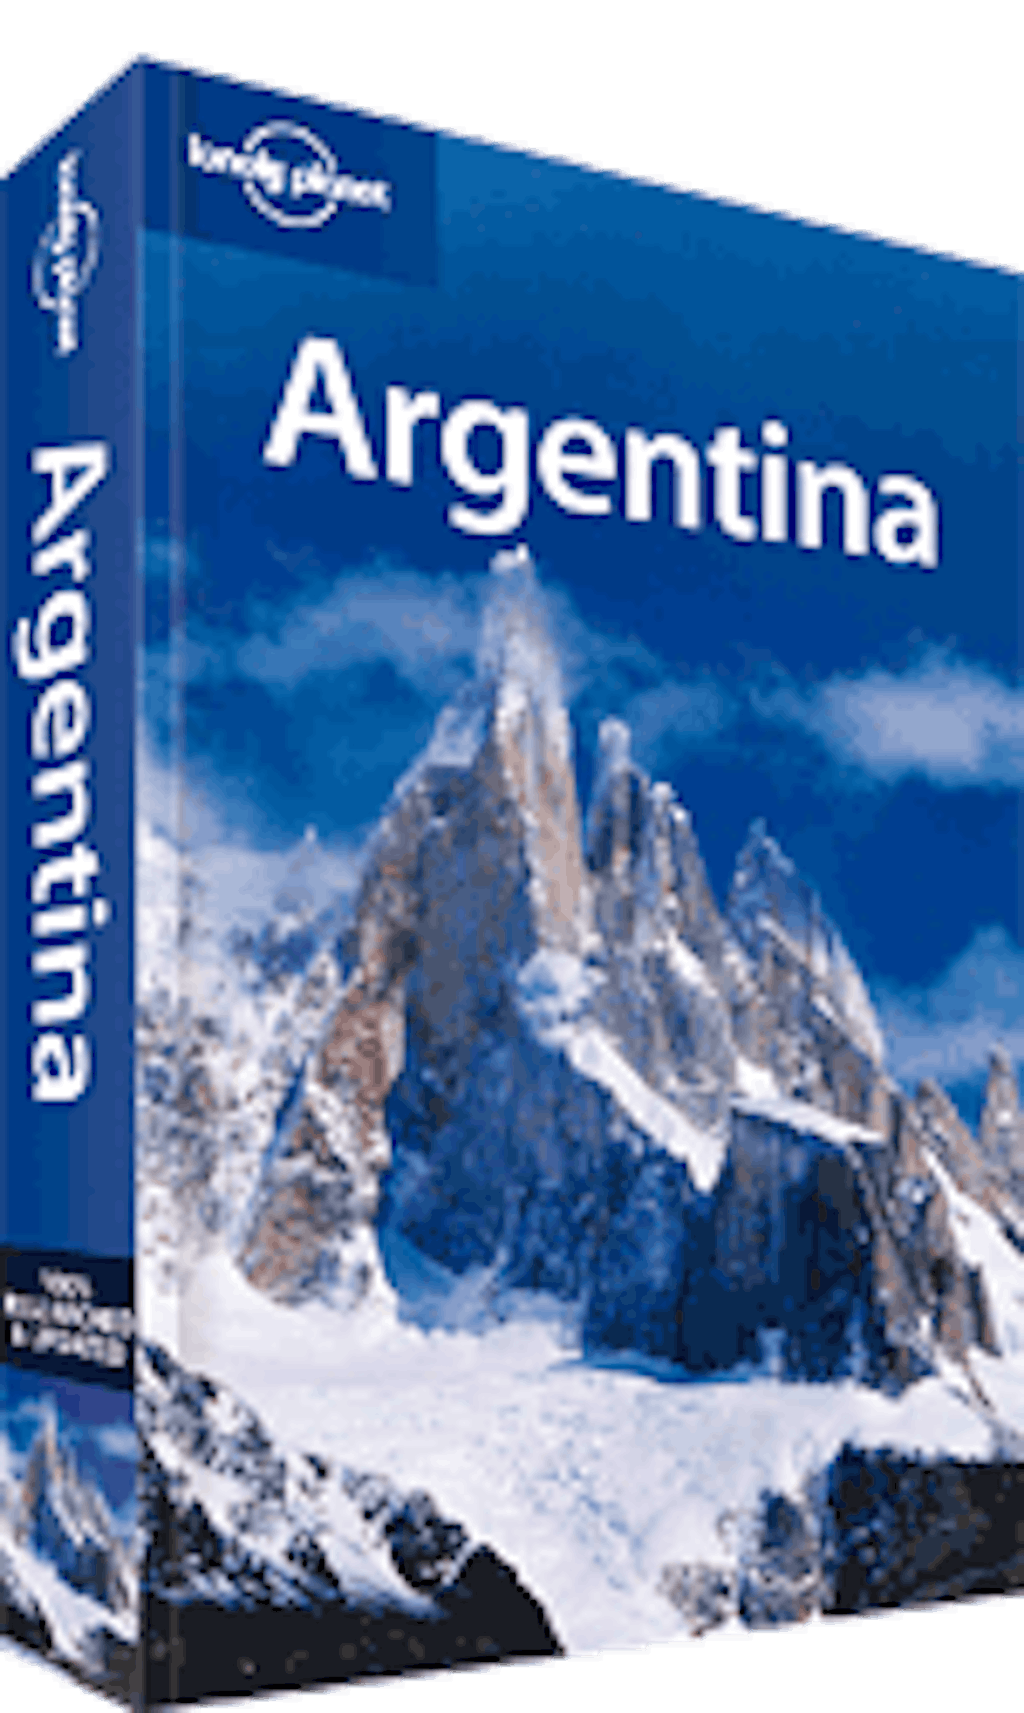 Features - Argentina_travel_guide_Large